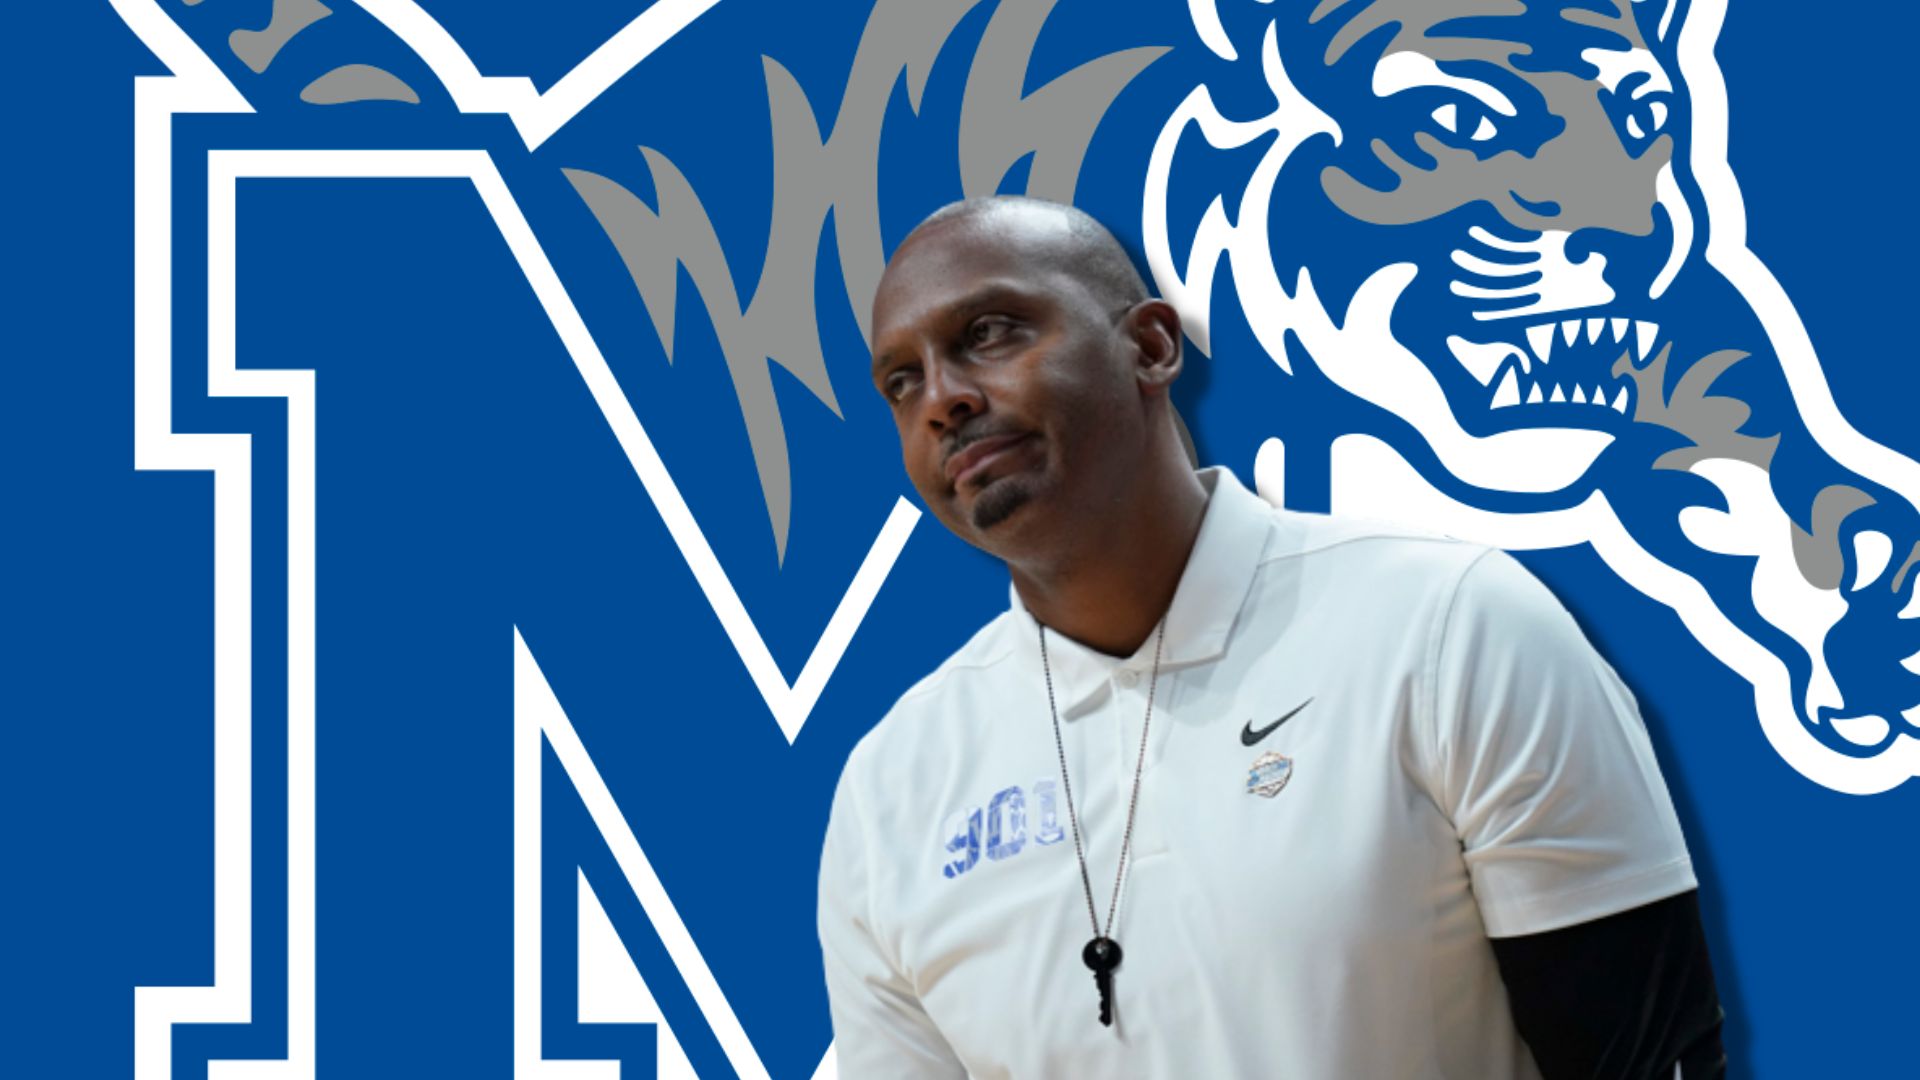 Memphis basketball: Penny Hardaway suspended for 3 games